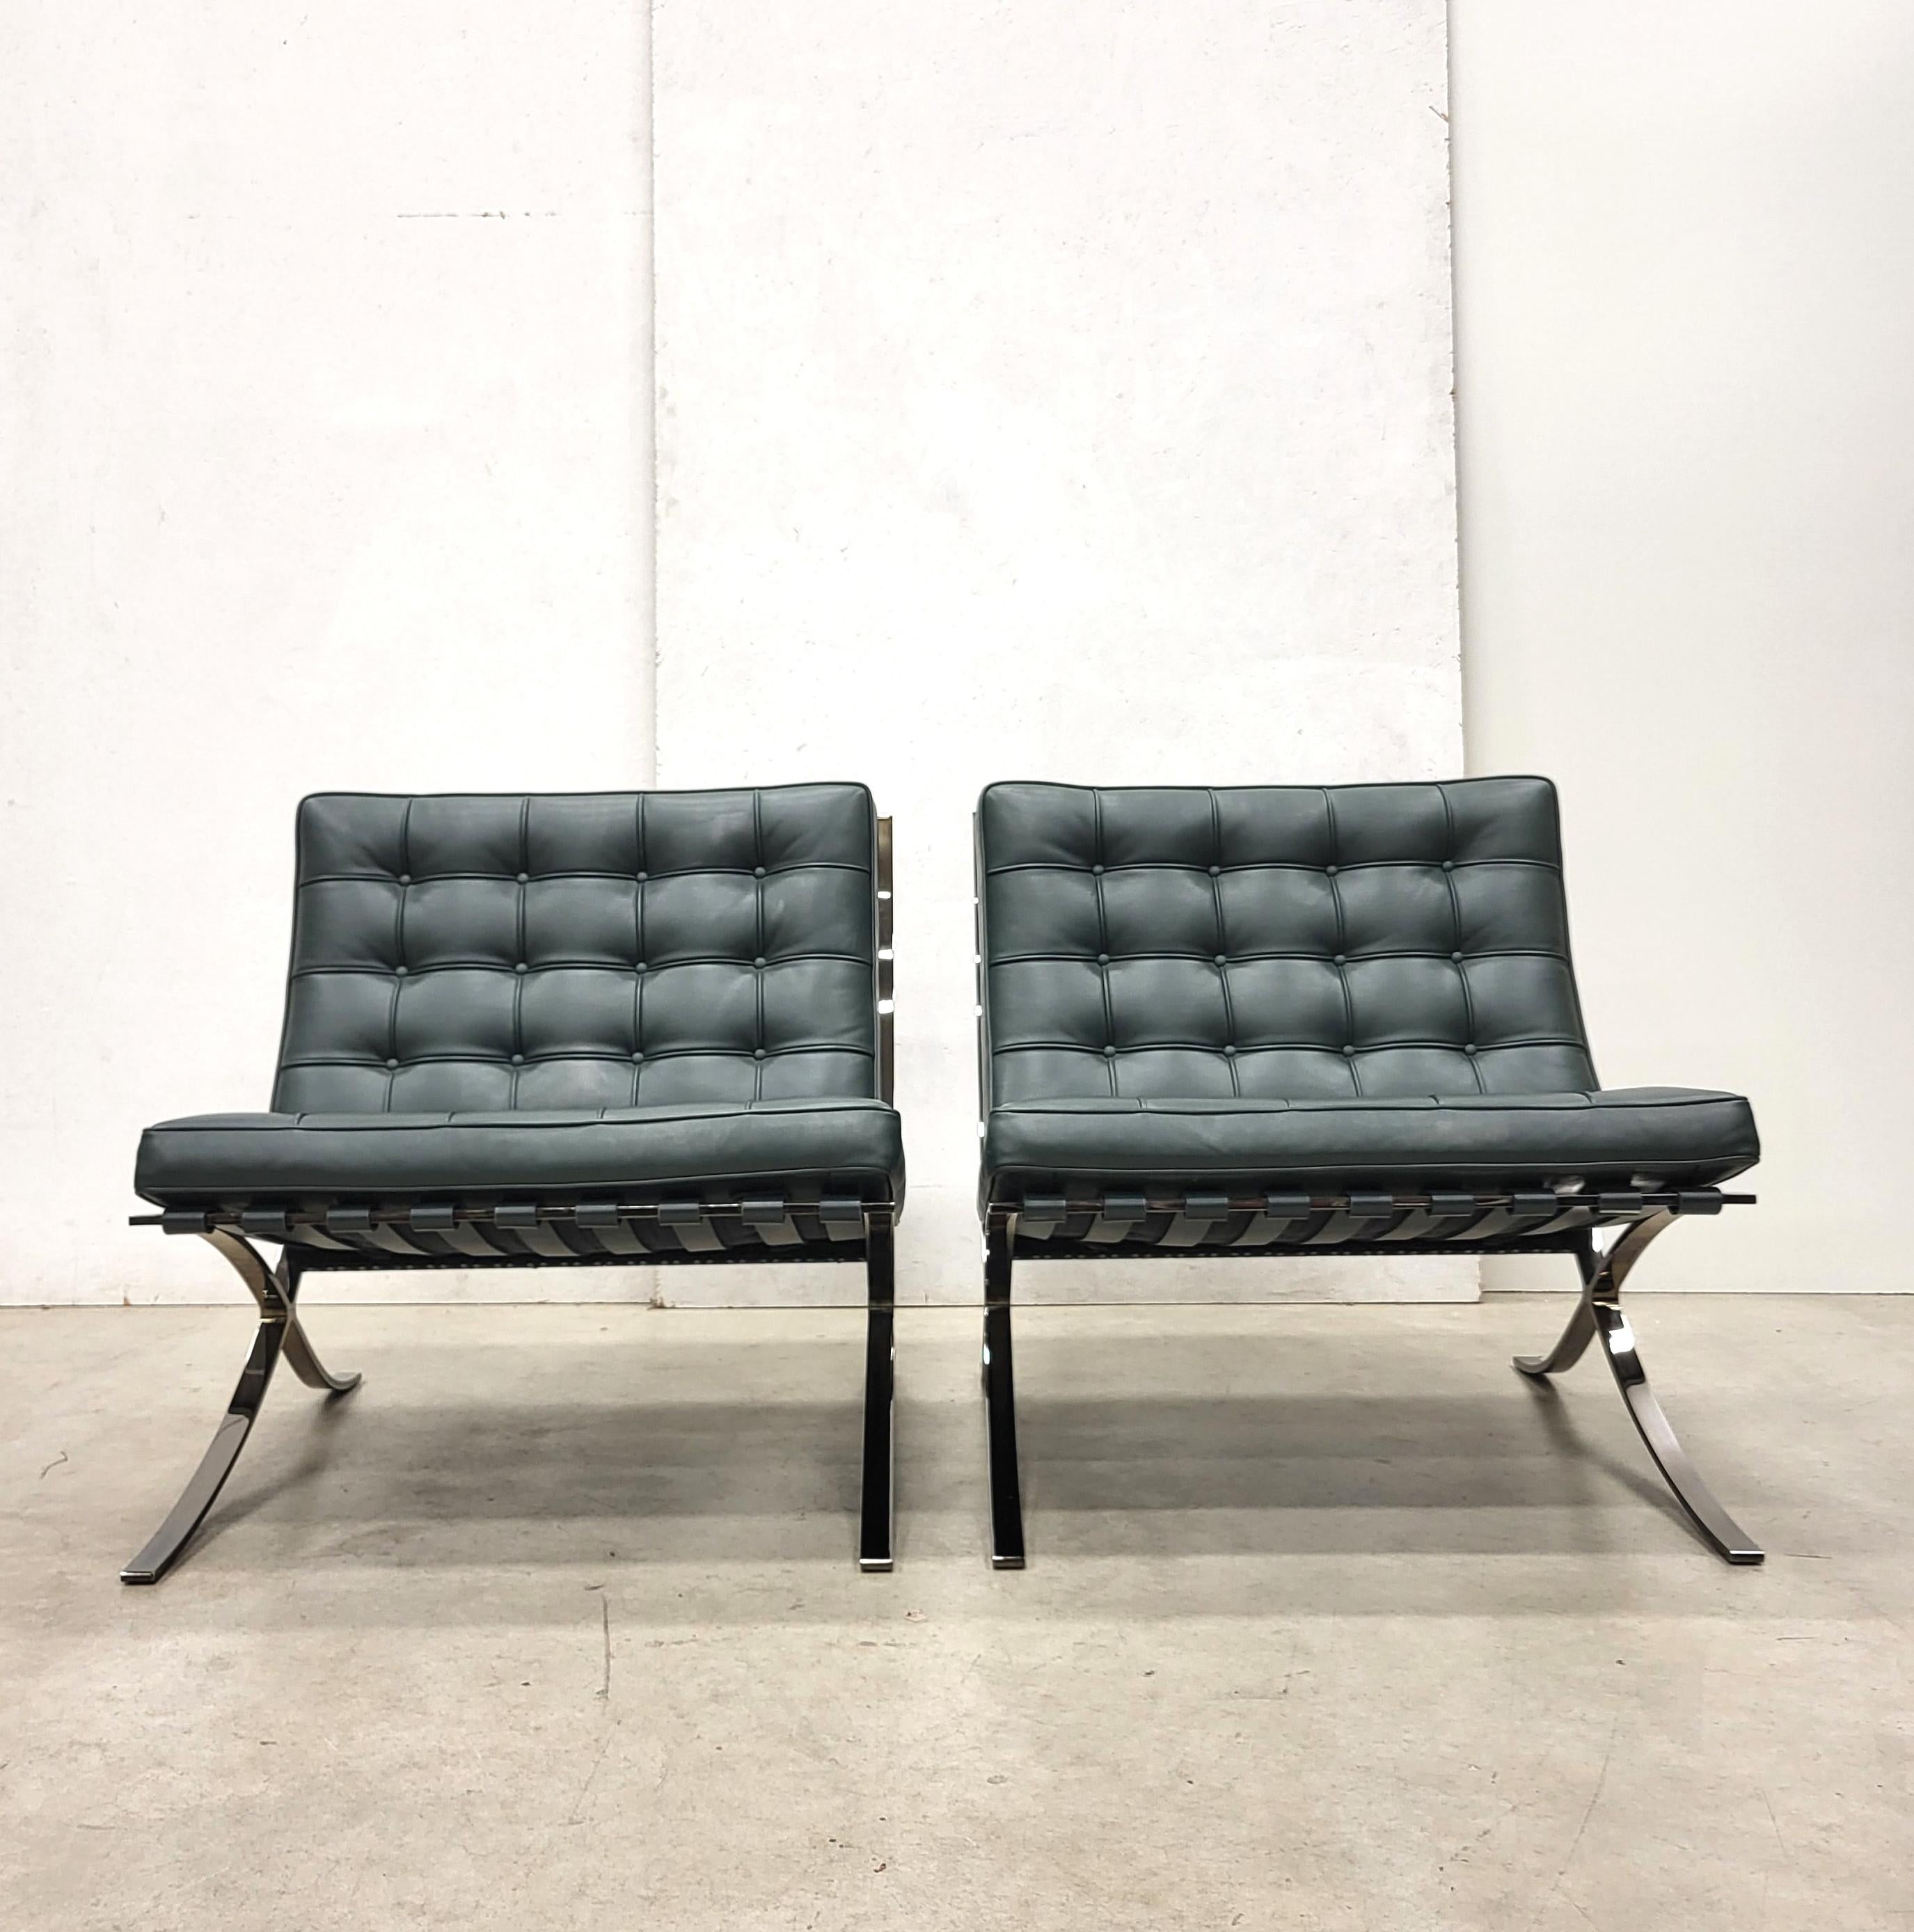 These very rare Barcelona chairs were designed by Mies van der Rohe in 1929 and produced by Knoll in 2019 for the 100th anniversary of the world famous Bauhaus. No 123 and No 134 of 365.

With this backround, Knoll produced in 2019 a very rare